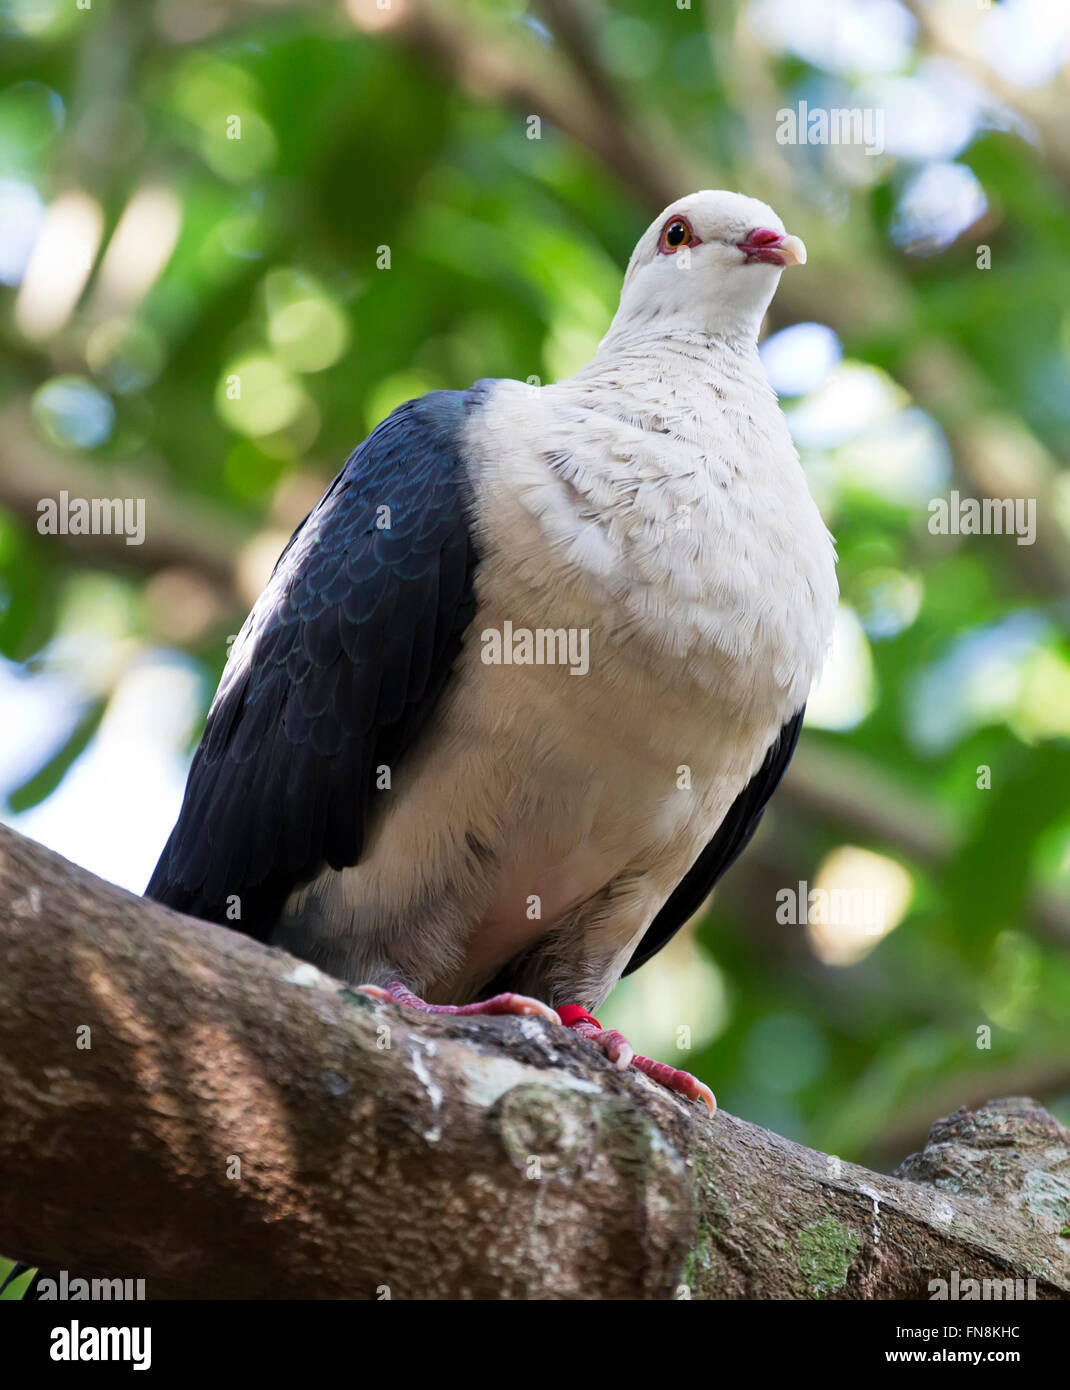 white headed pigeon photgrphed / pictured in the aviary at Australia zoo, queensland, australia Stock Photo